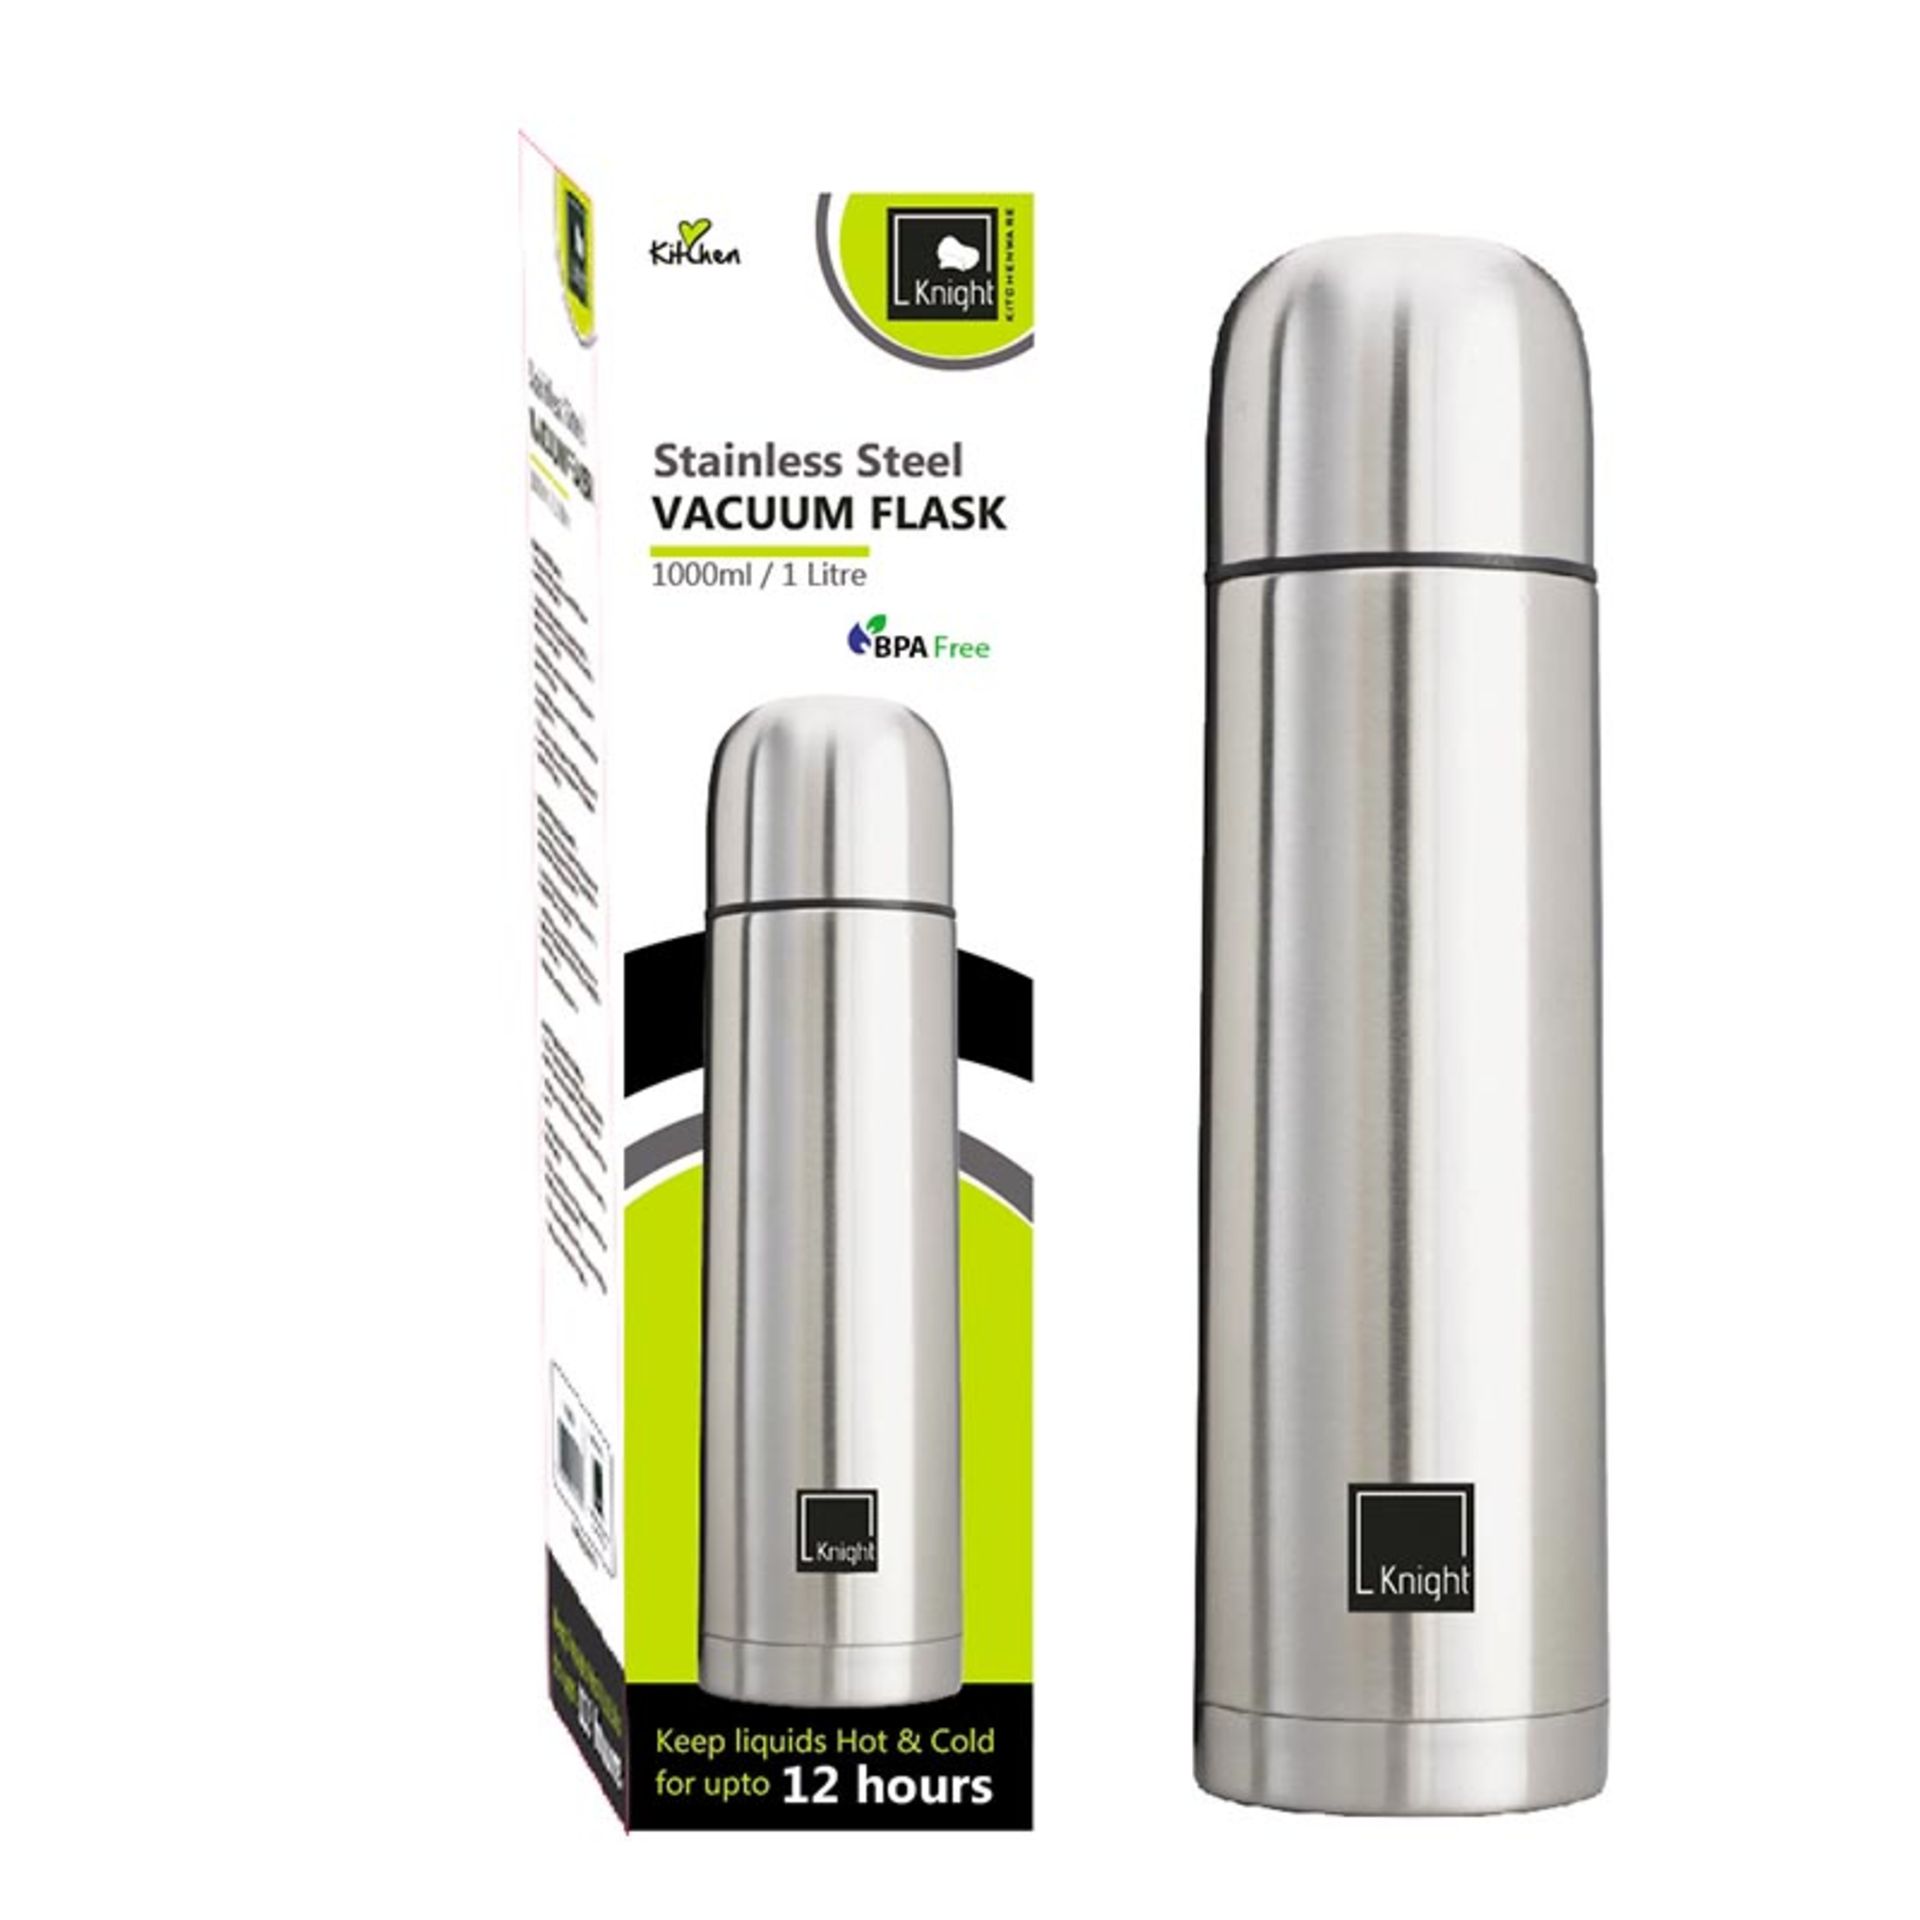 V Brand New Stainless Steel 1000ml/1 Litre Vacuum Flask-Food Grade-One Touch Stopper-Keeps Liquid